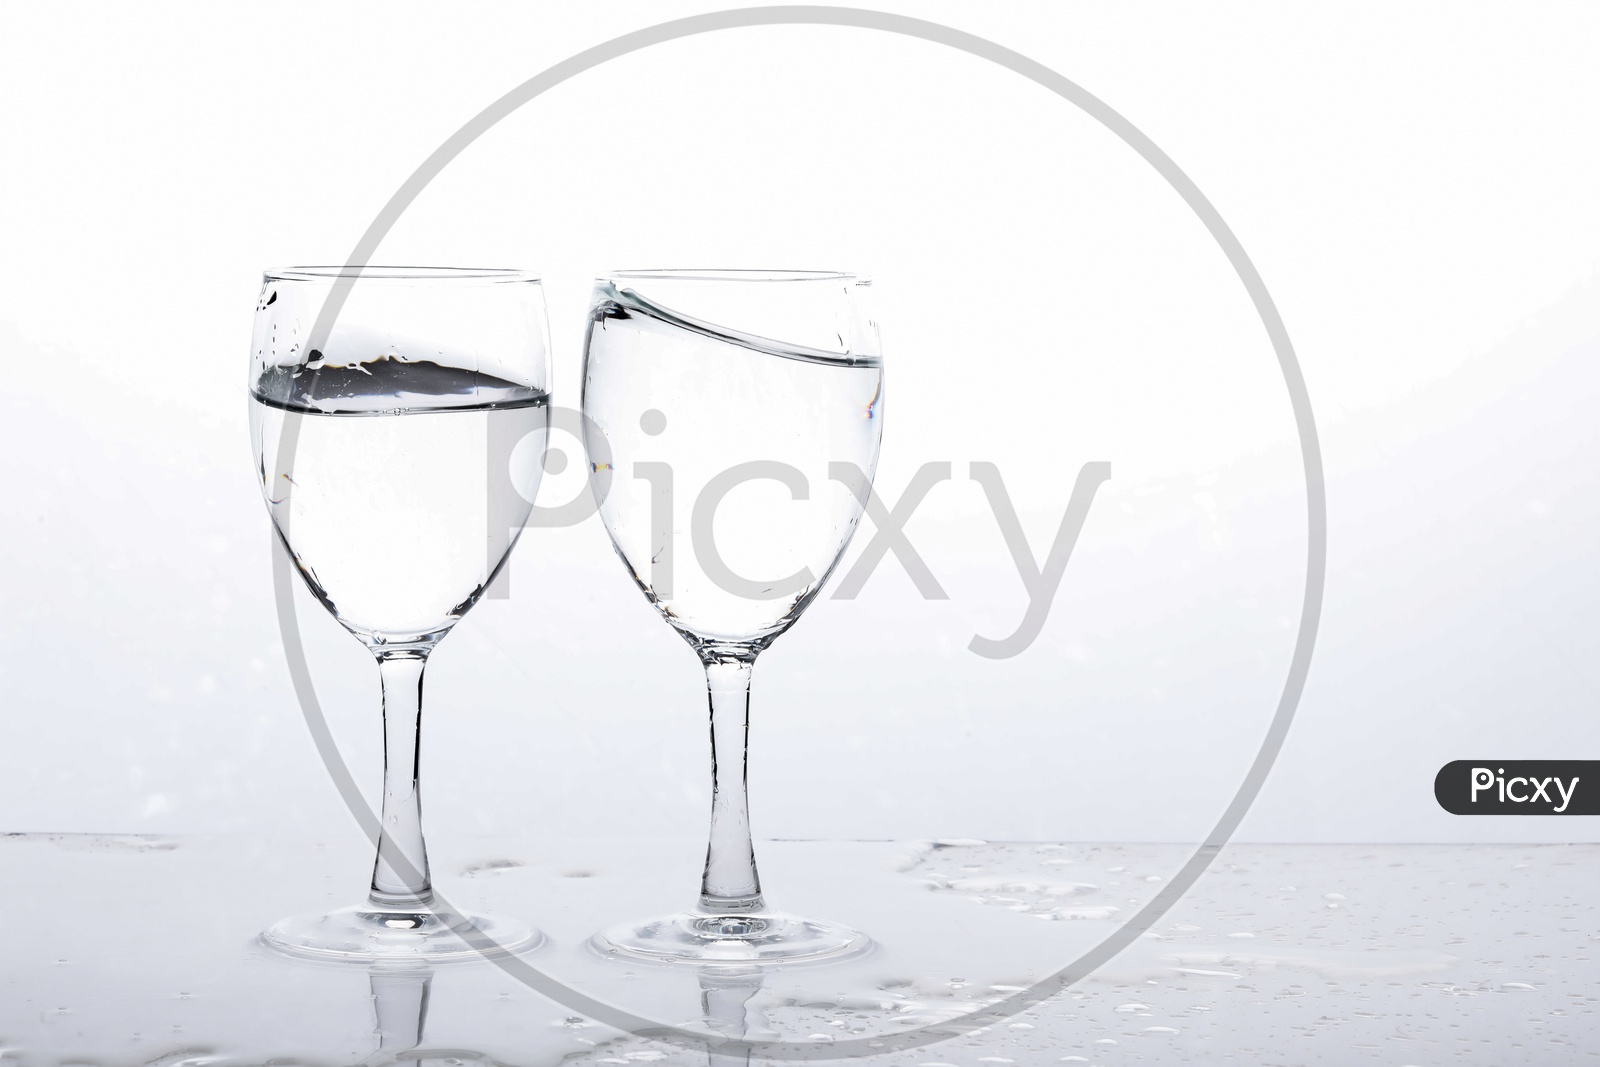 Empty Wine Glasses Filled With Water On an Isolated White Background